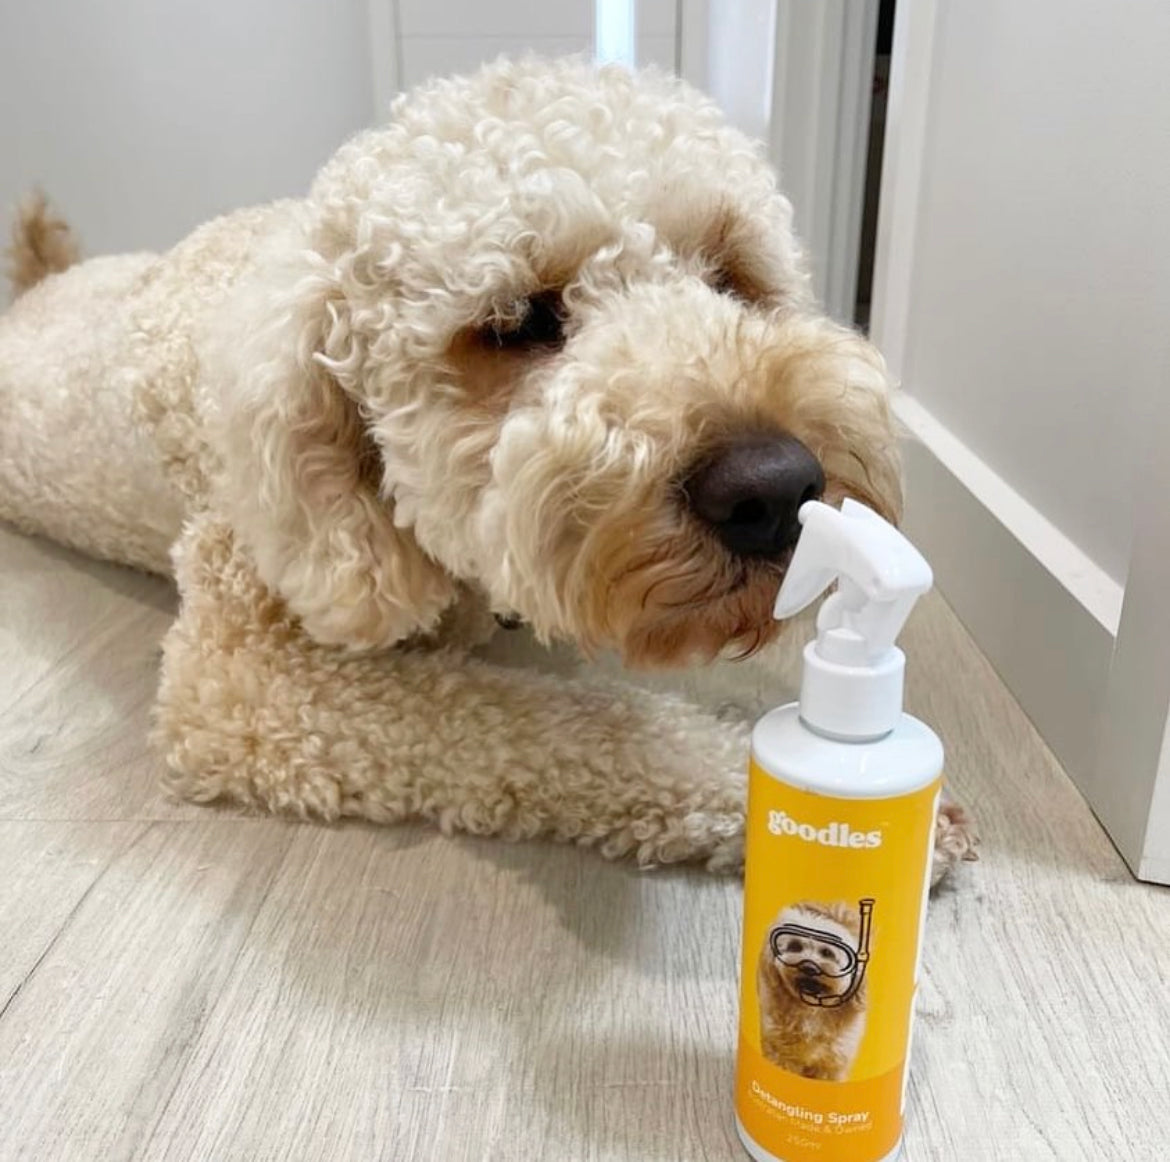 Mastering Oodle Grooming: It's all in the coat